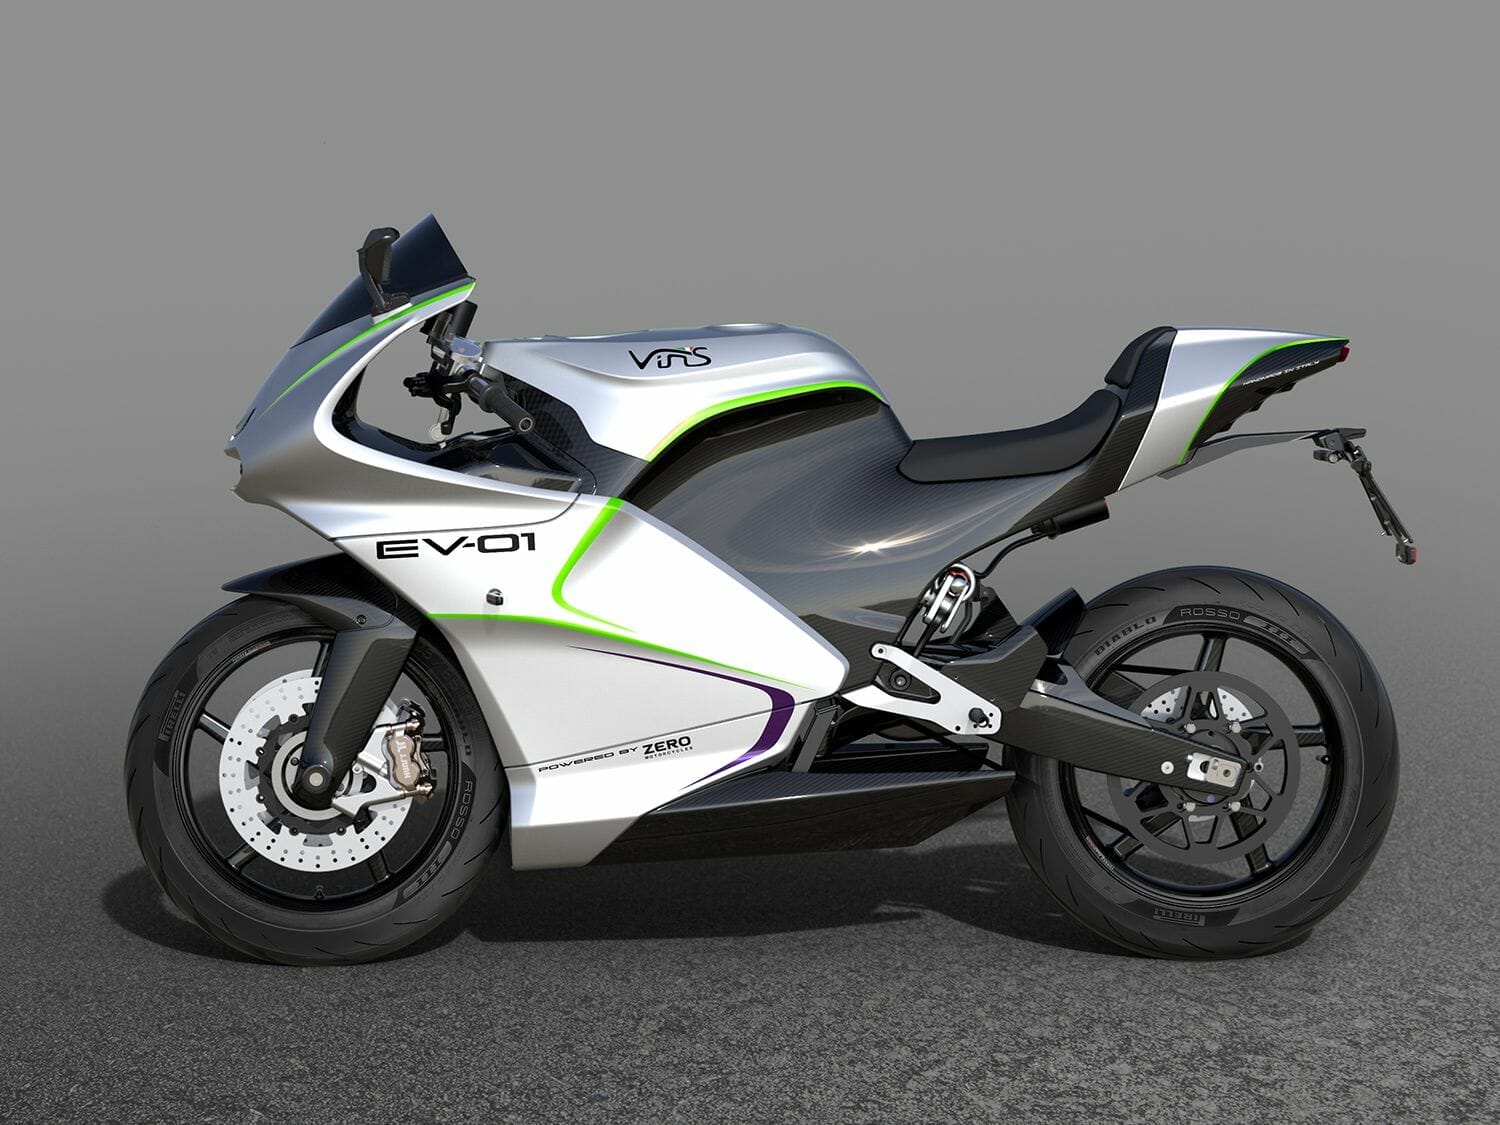 Electric sports motorcycle Vins EV-01
- also in the app Motorcycle News